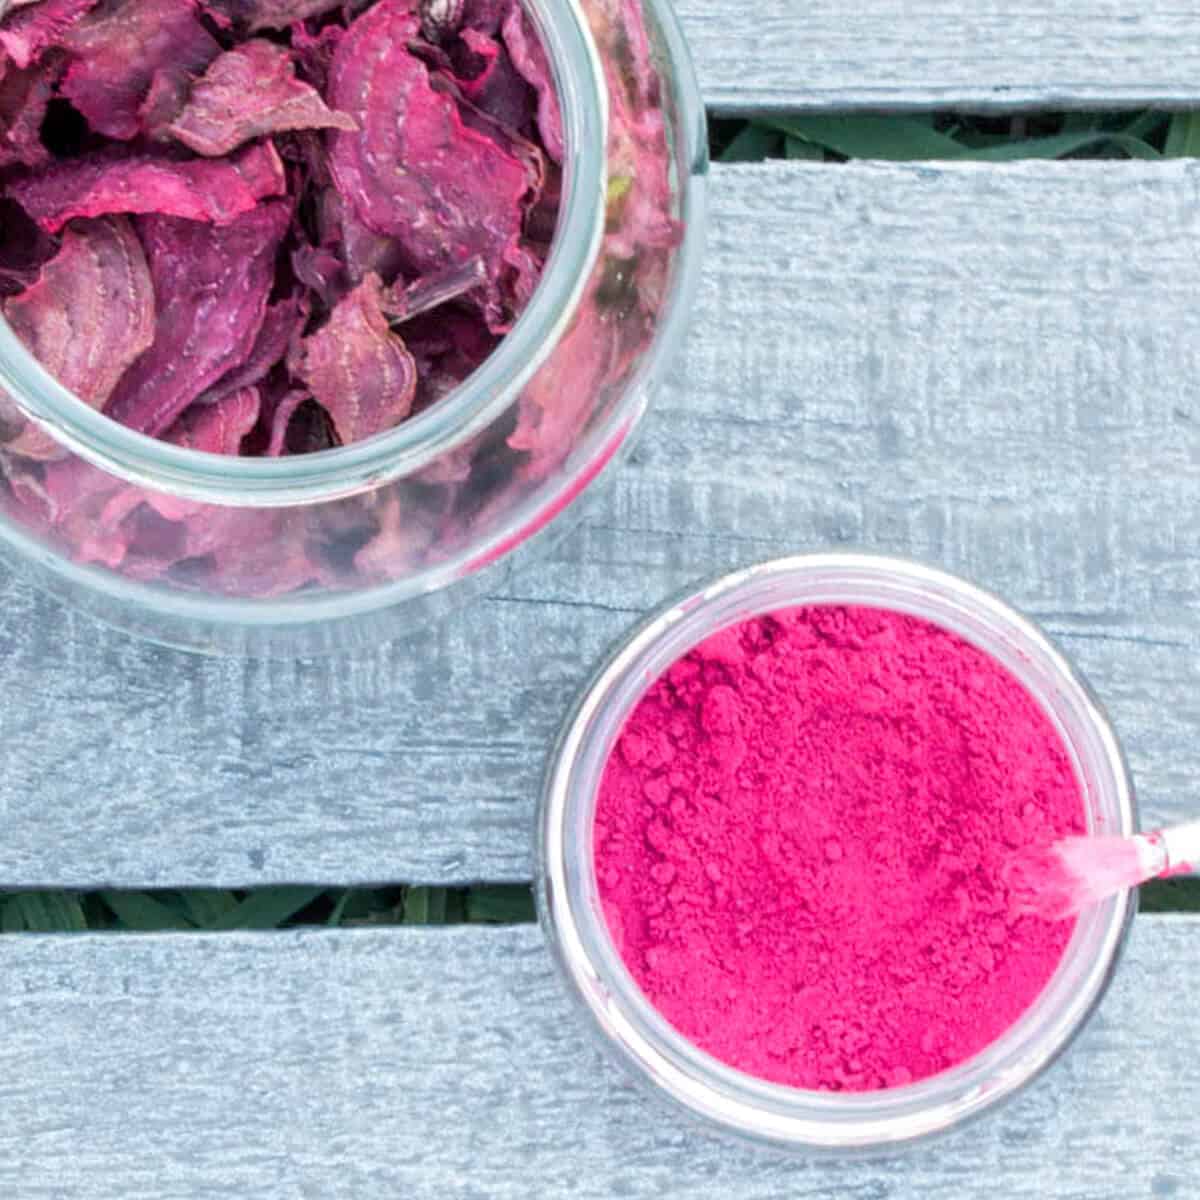 How to Make Beetroot Powder - Oh, The Things We'll Make!